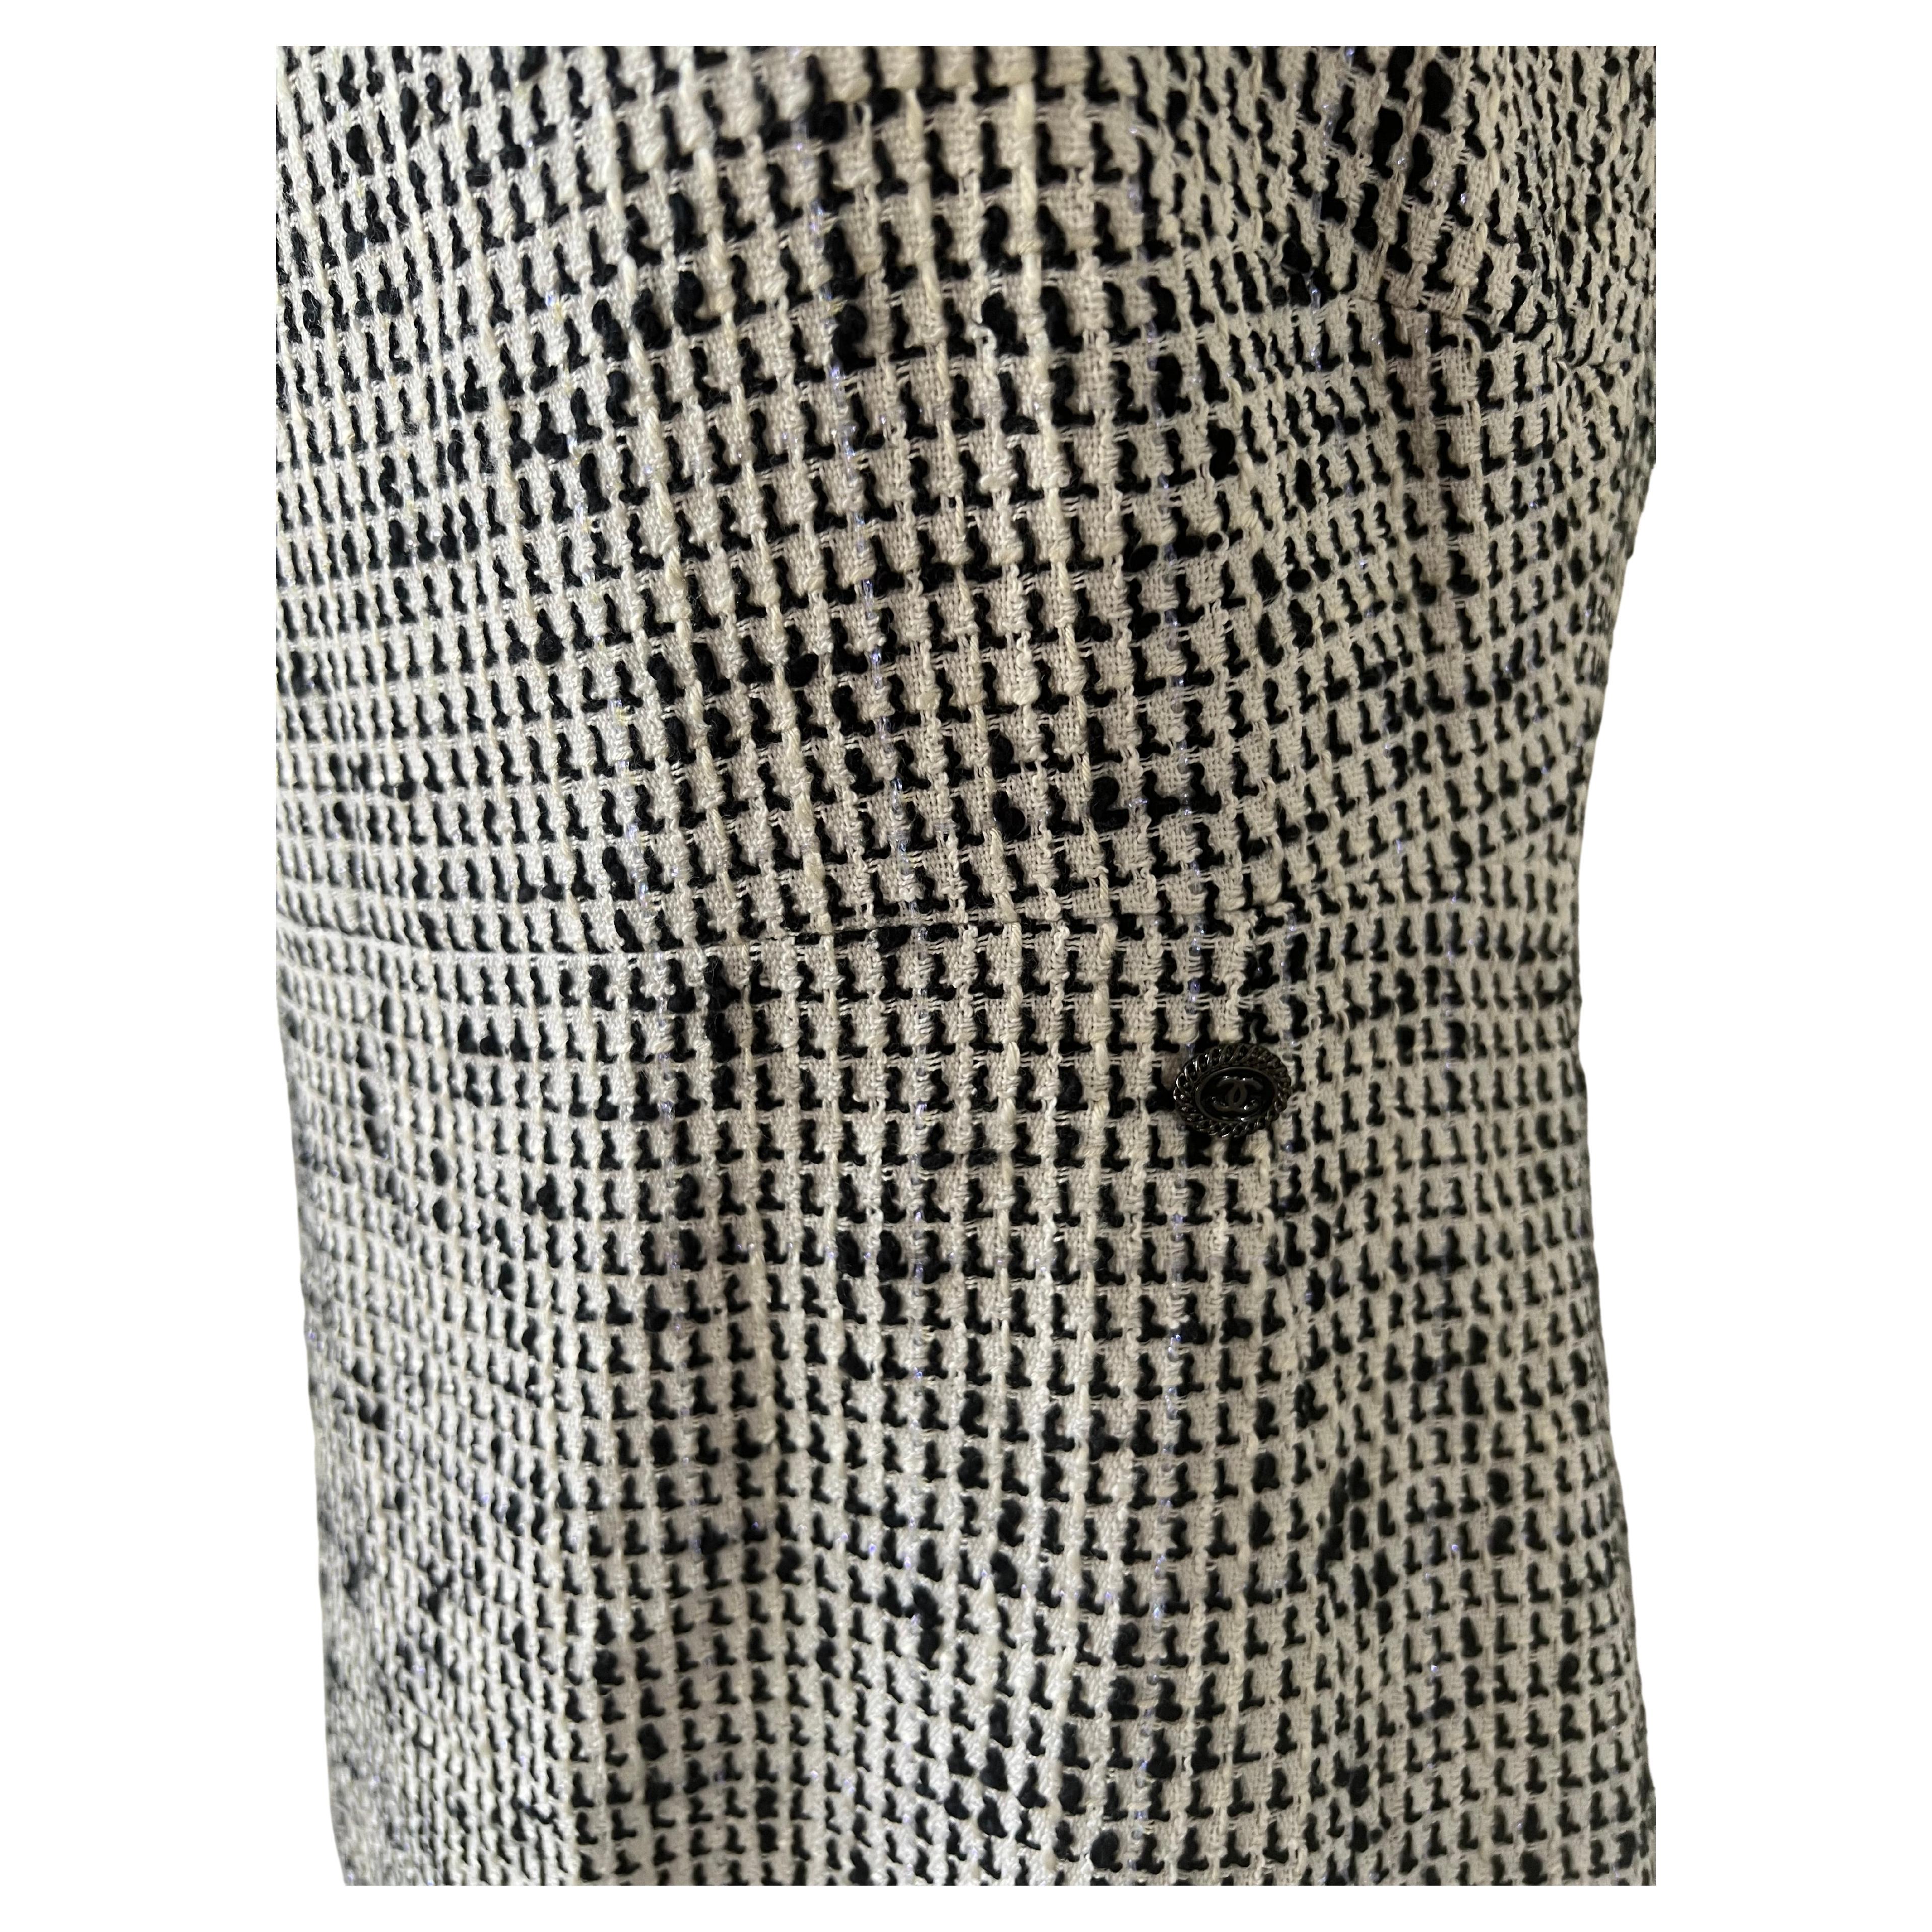 Black and White Tweed Dress Chanel 2010 For Sale 1